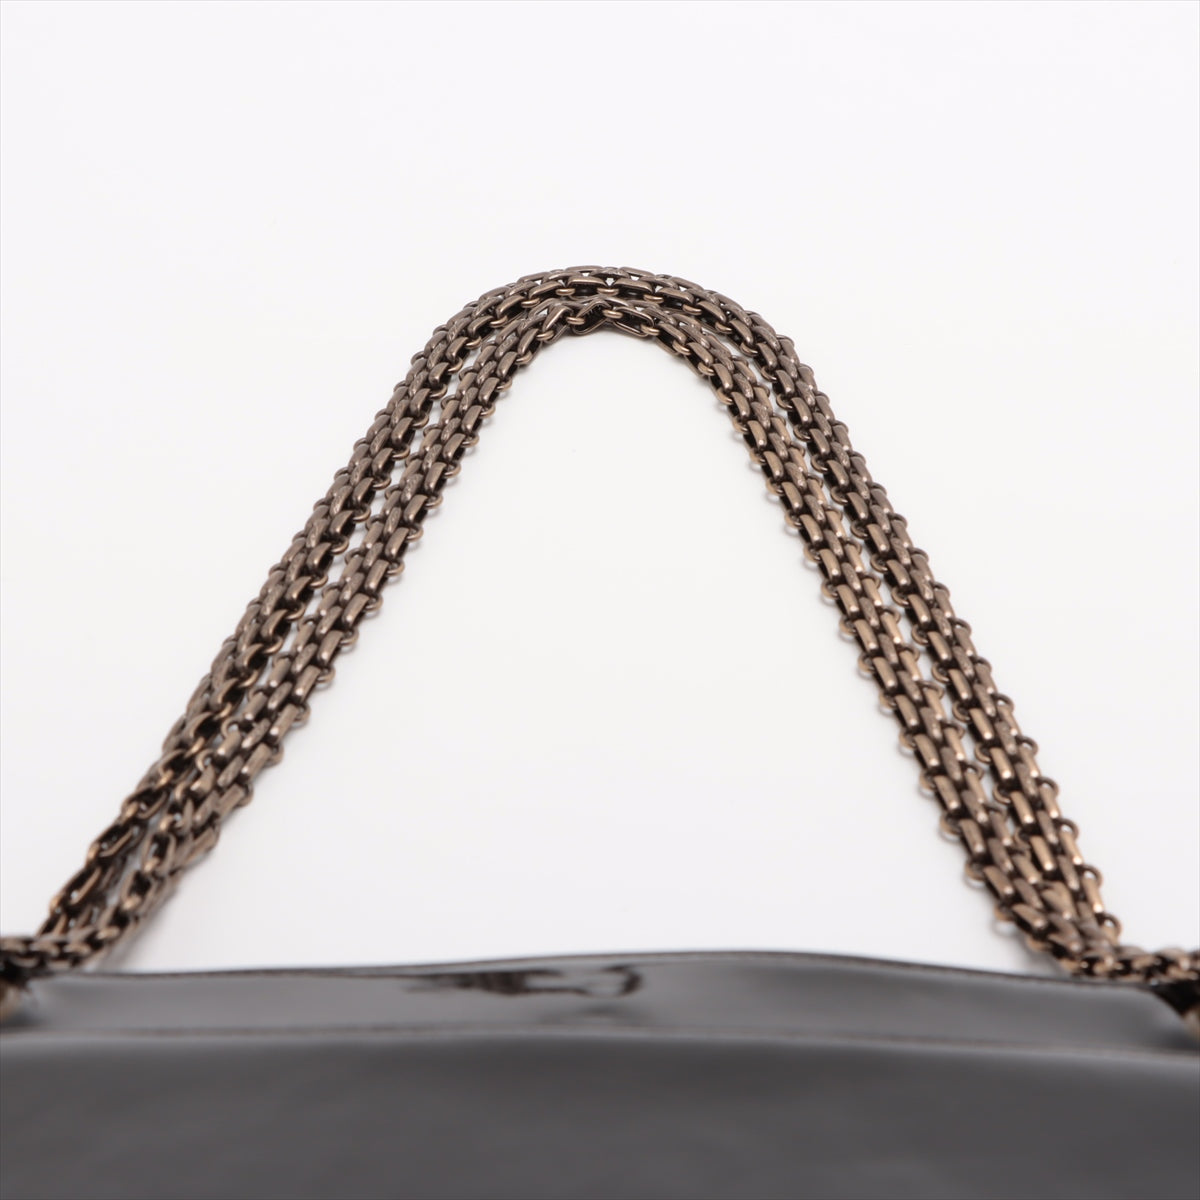 Chanel Coco Patent Leather Chaintot Bag Black G  6th